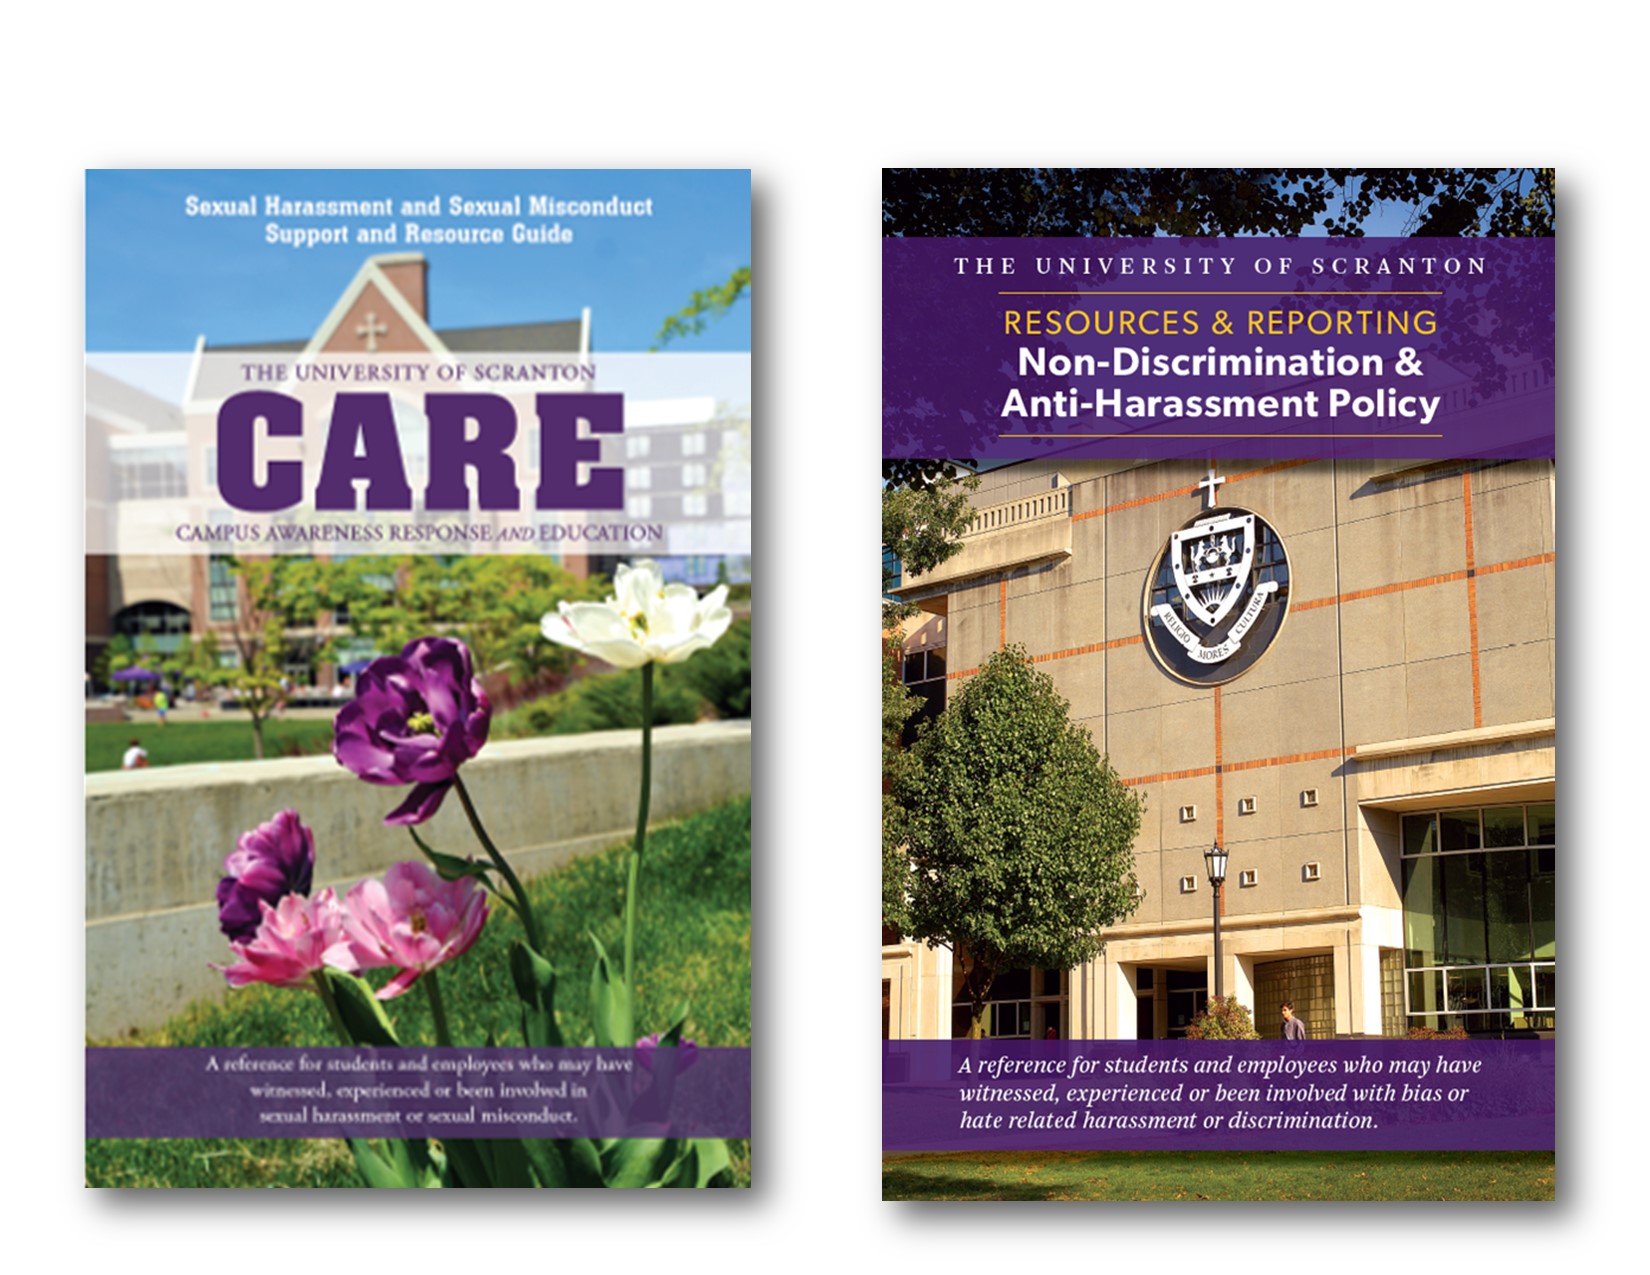 Picture of the two resource brochures related to sexual misconduct and unlawful discrimination and harassment.